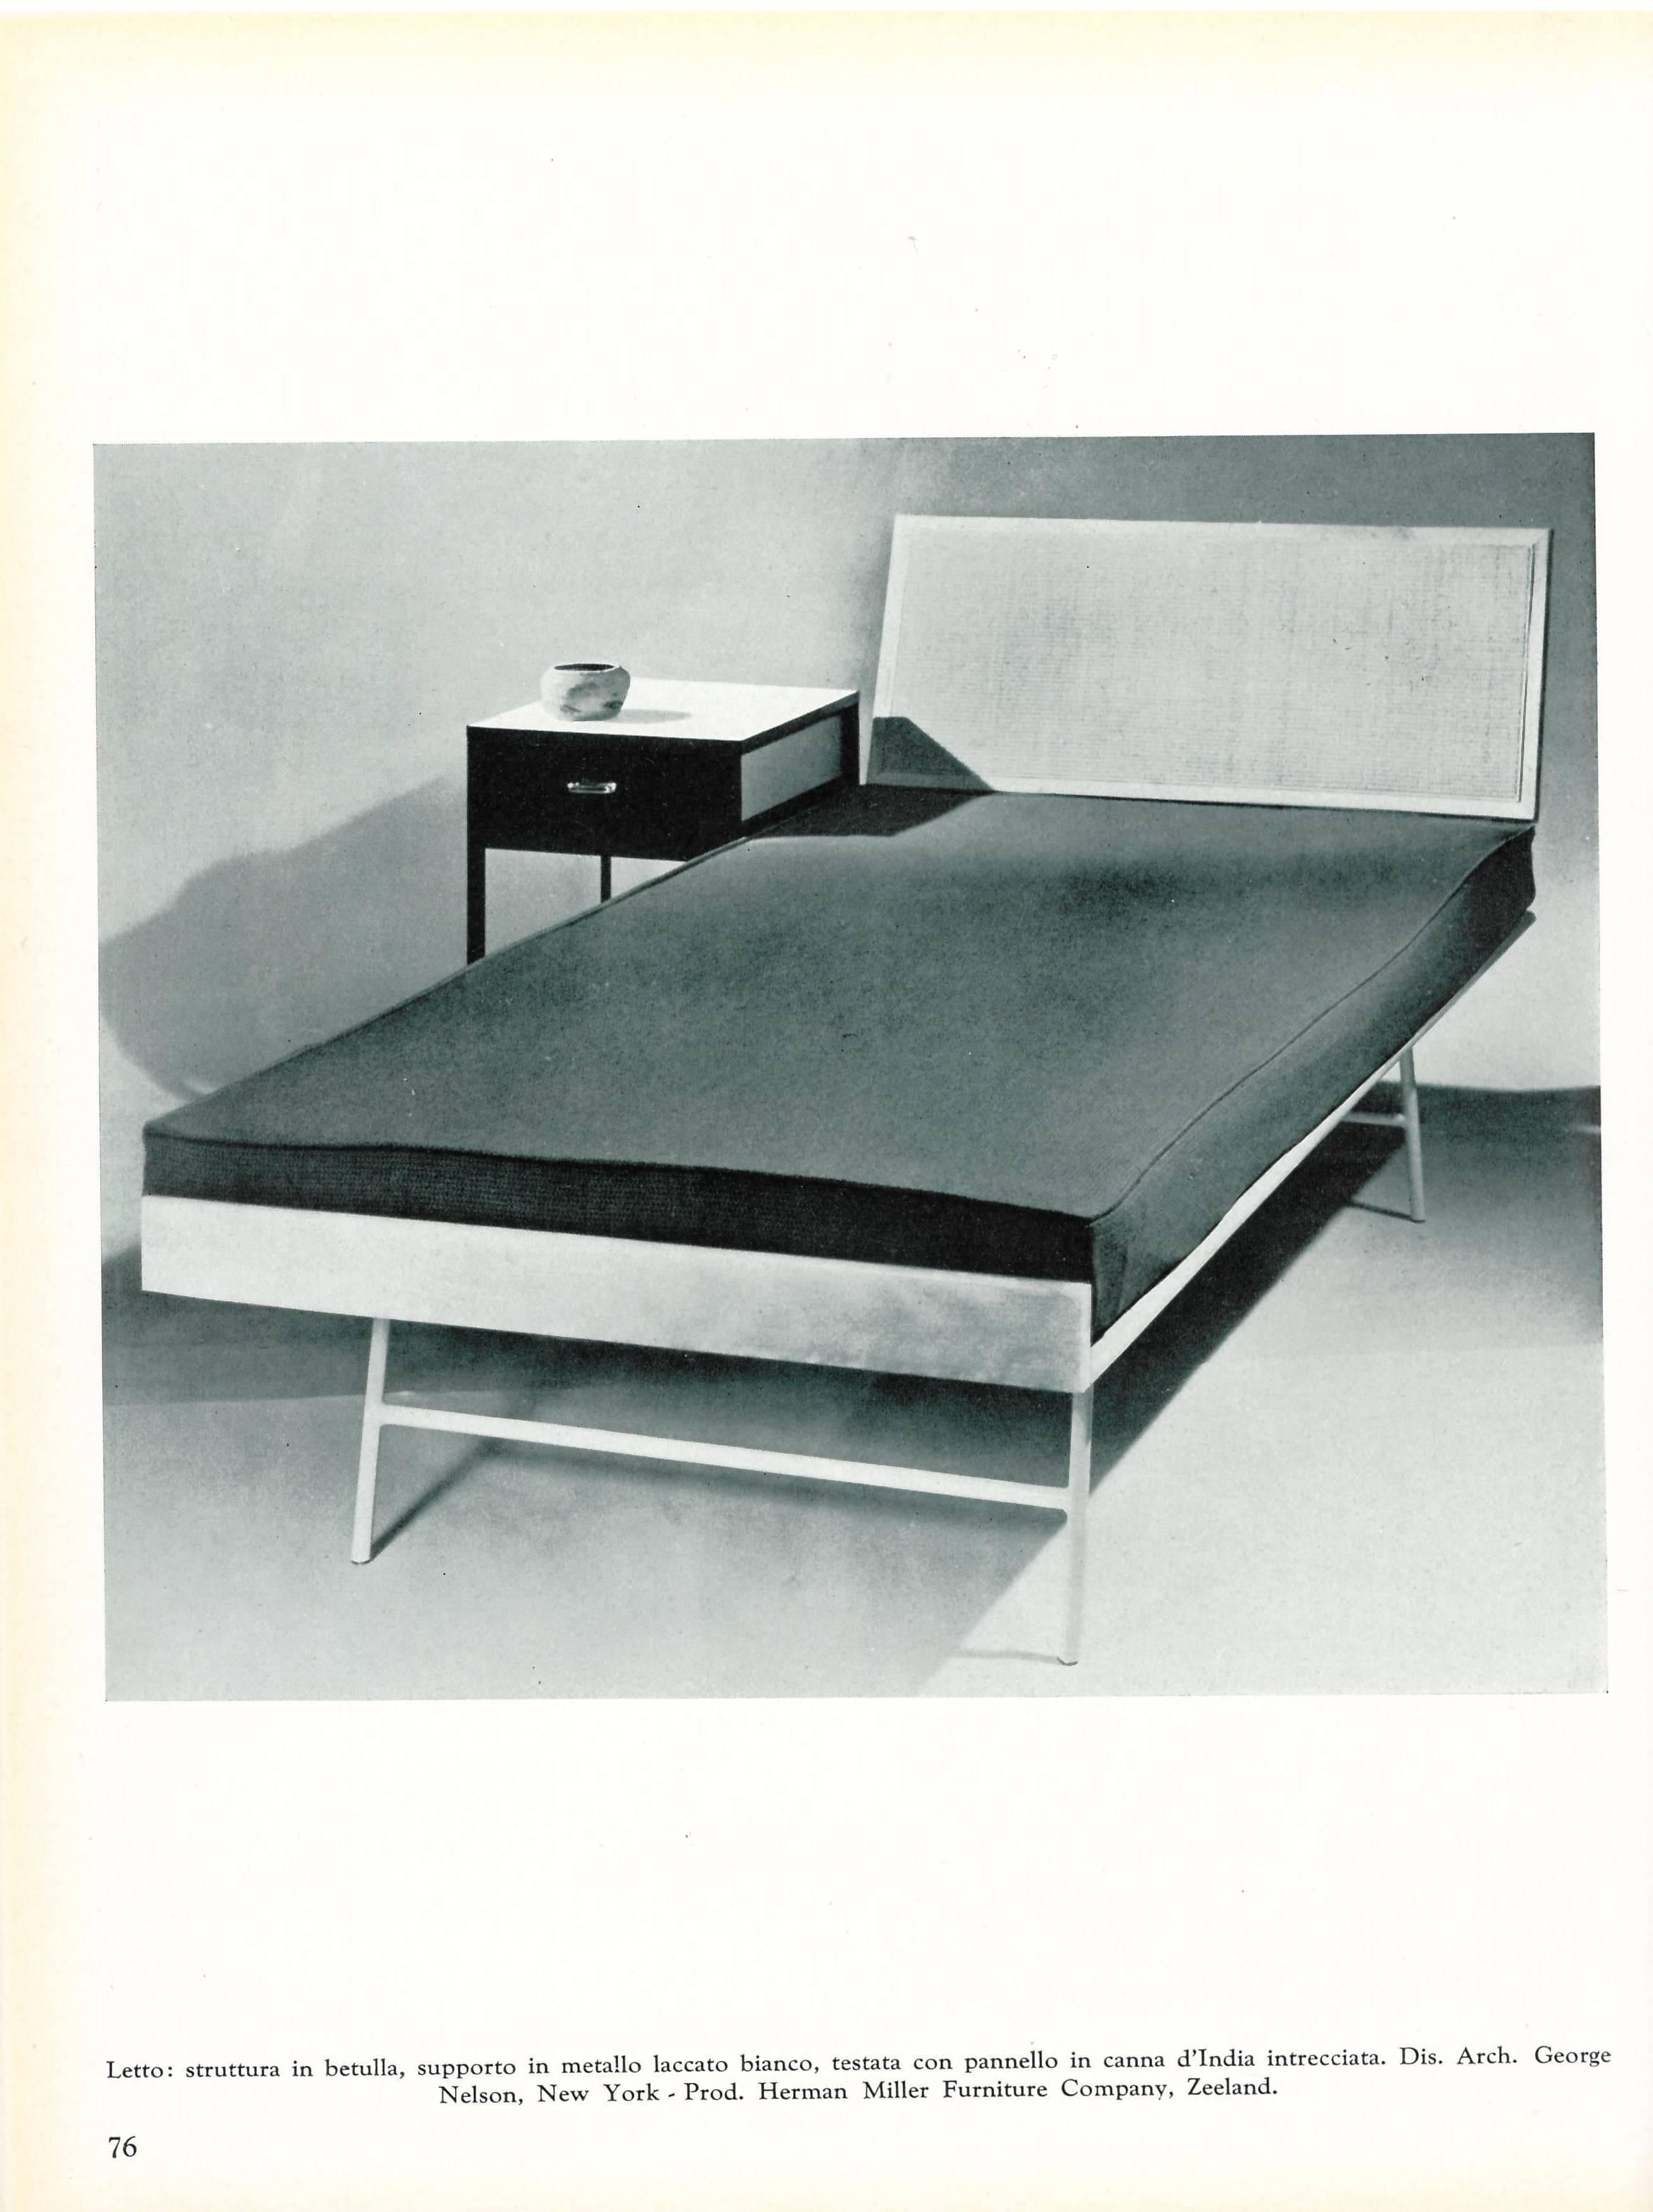 A hardback book published in 1956 with many examples of midcentury furniture designed and produced by some of the most famous designers of that period. Included are the likes of - Gio Ponti, Herman Miller, Finn Juhl, Osvaldo Borsani, Knoll, Poul